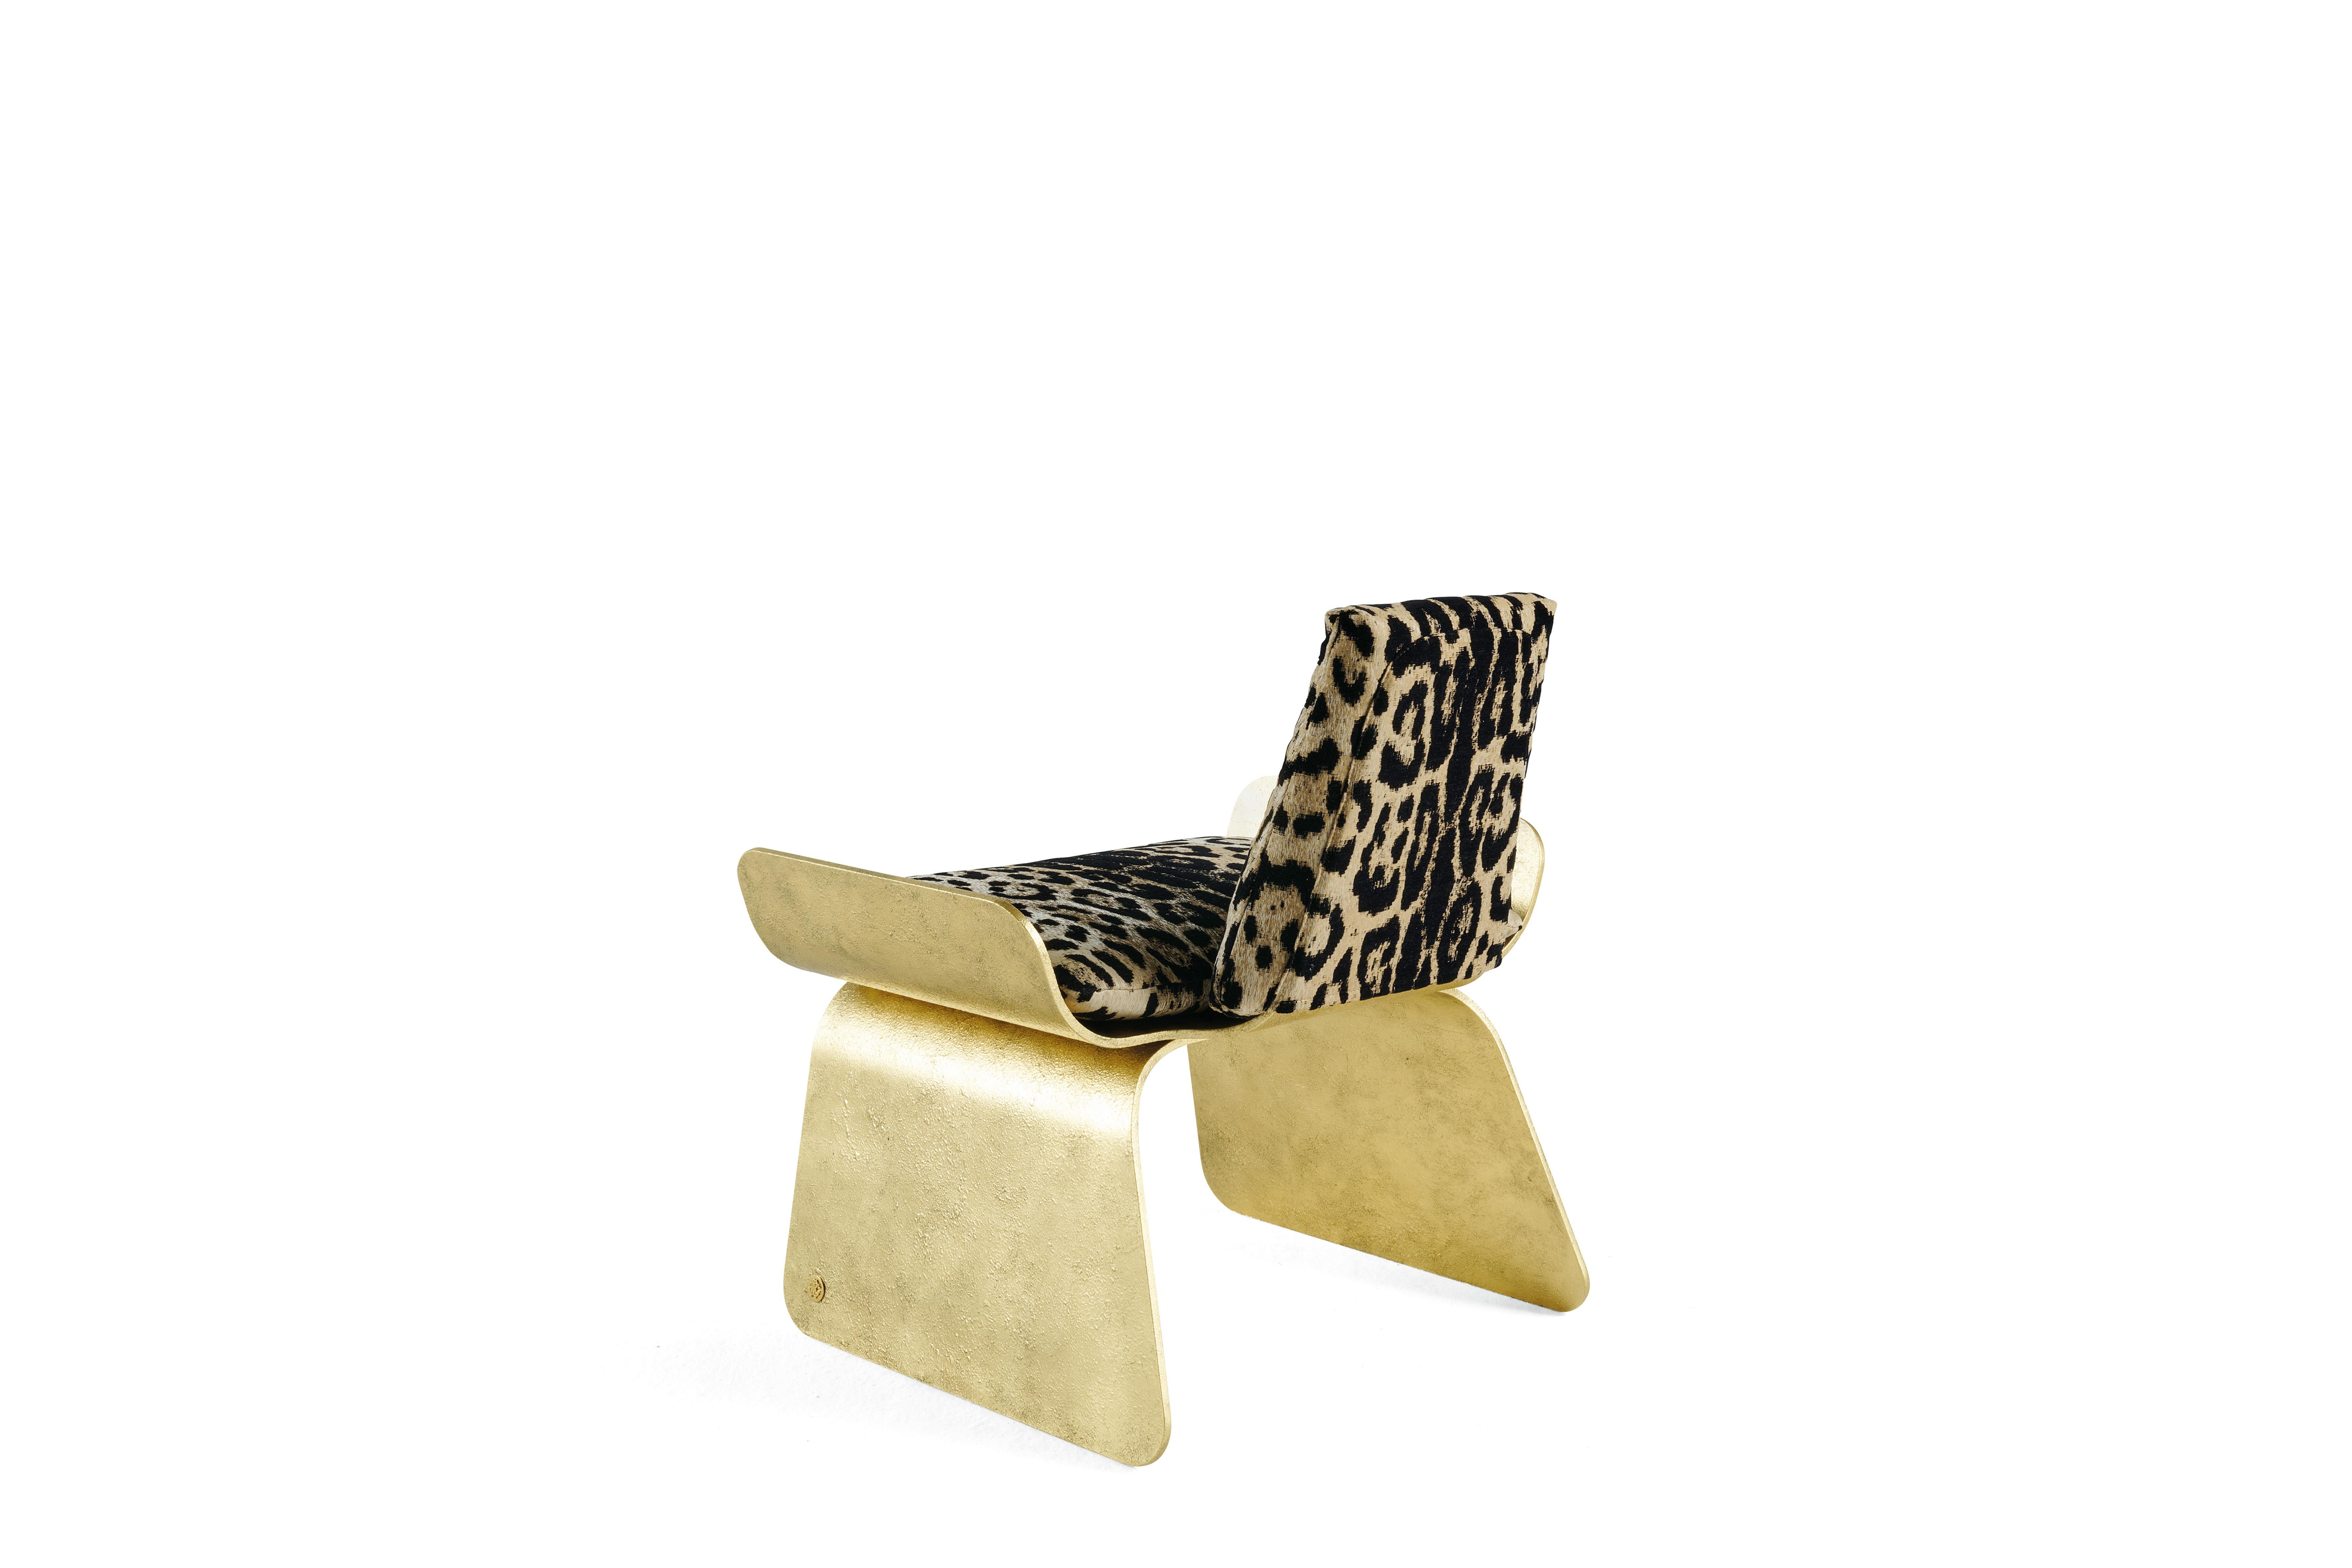 Modern 21st Century Iranja Armchair in Jacquard by Roberto Cavalli Home Interiors For Sale